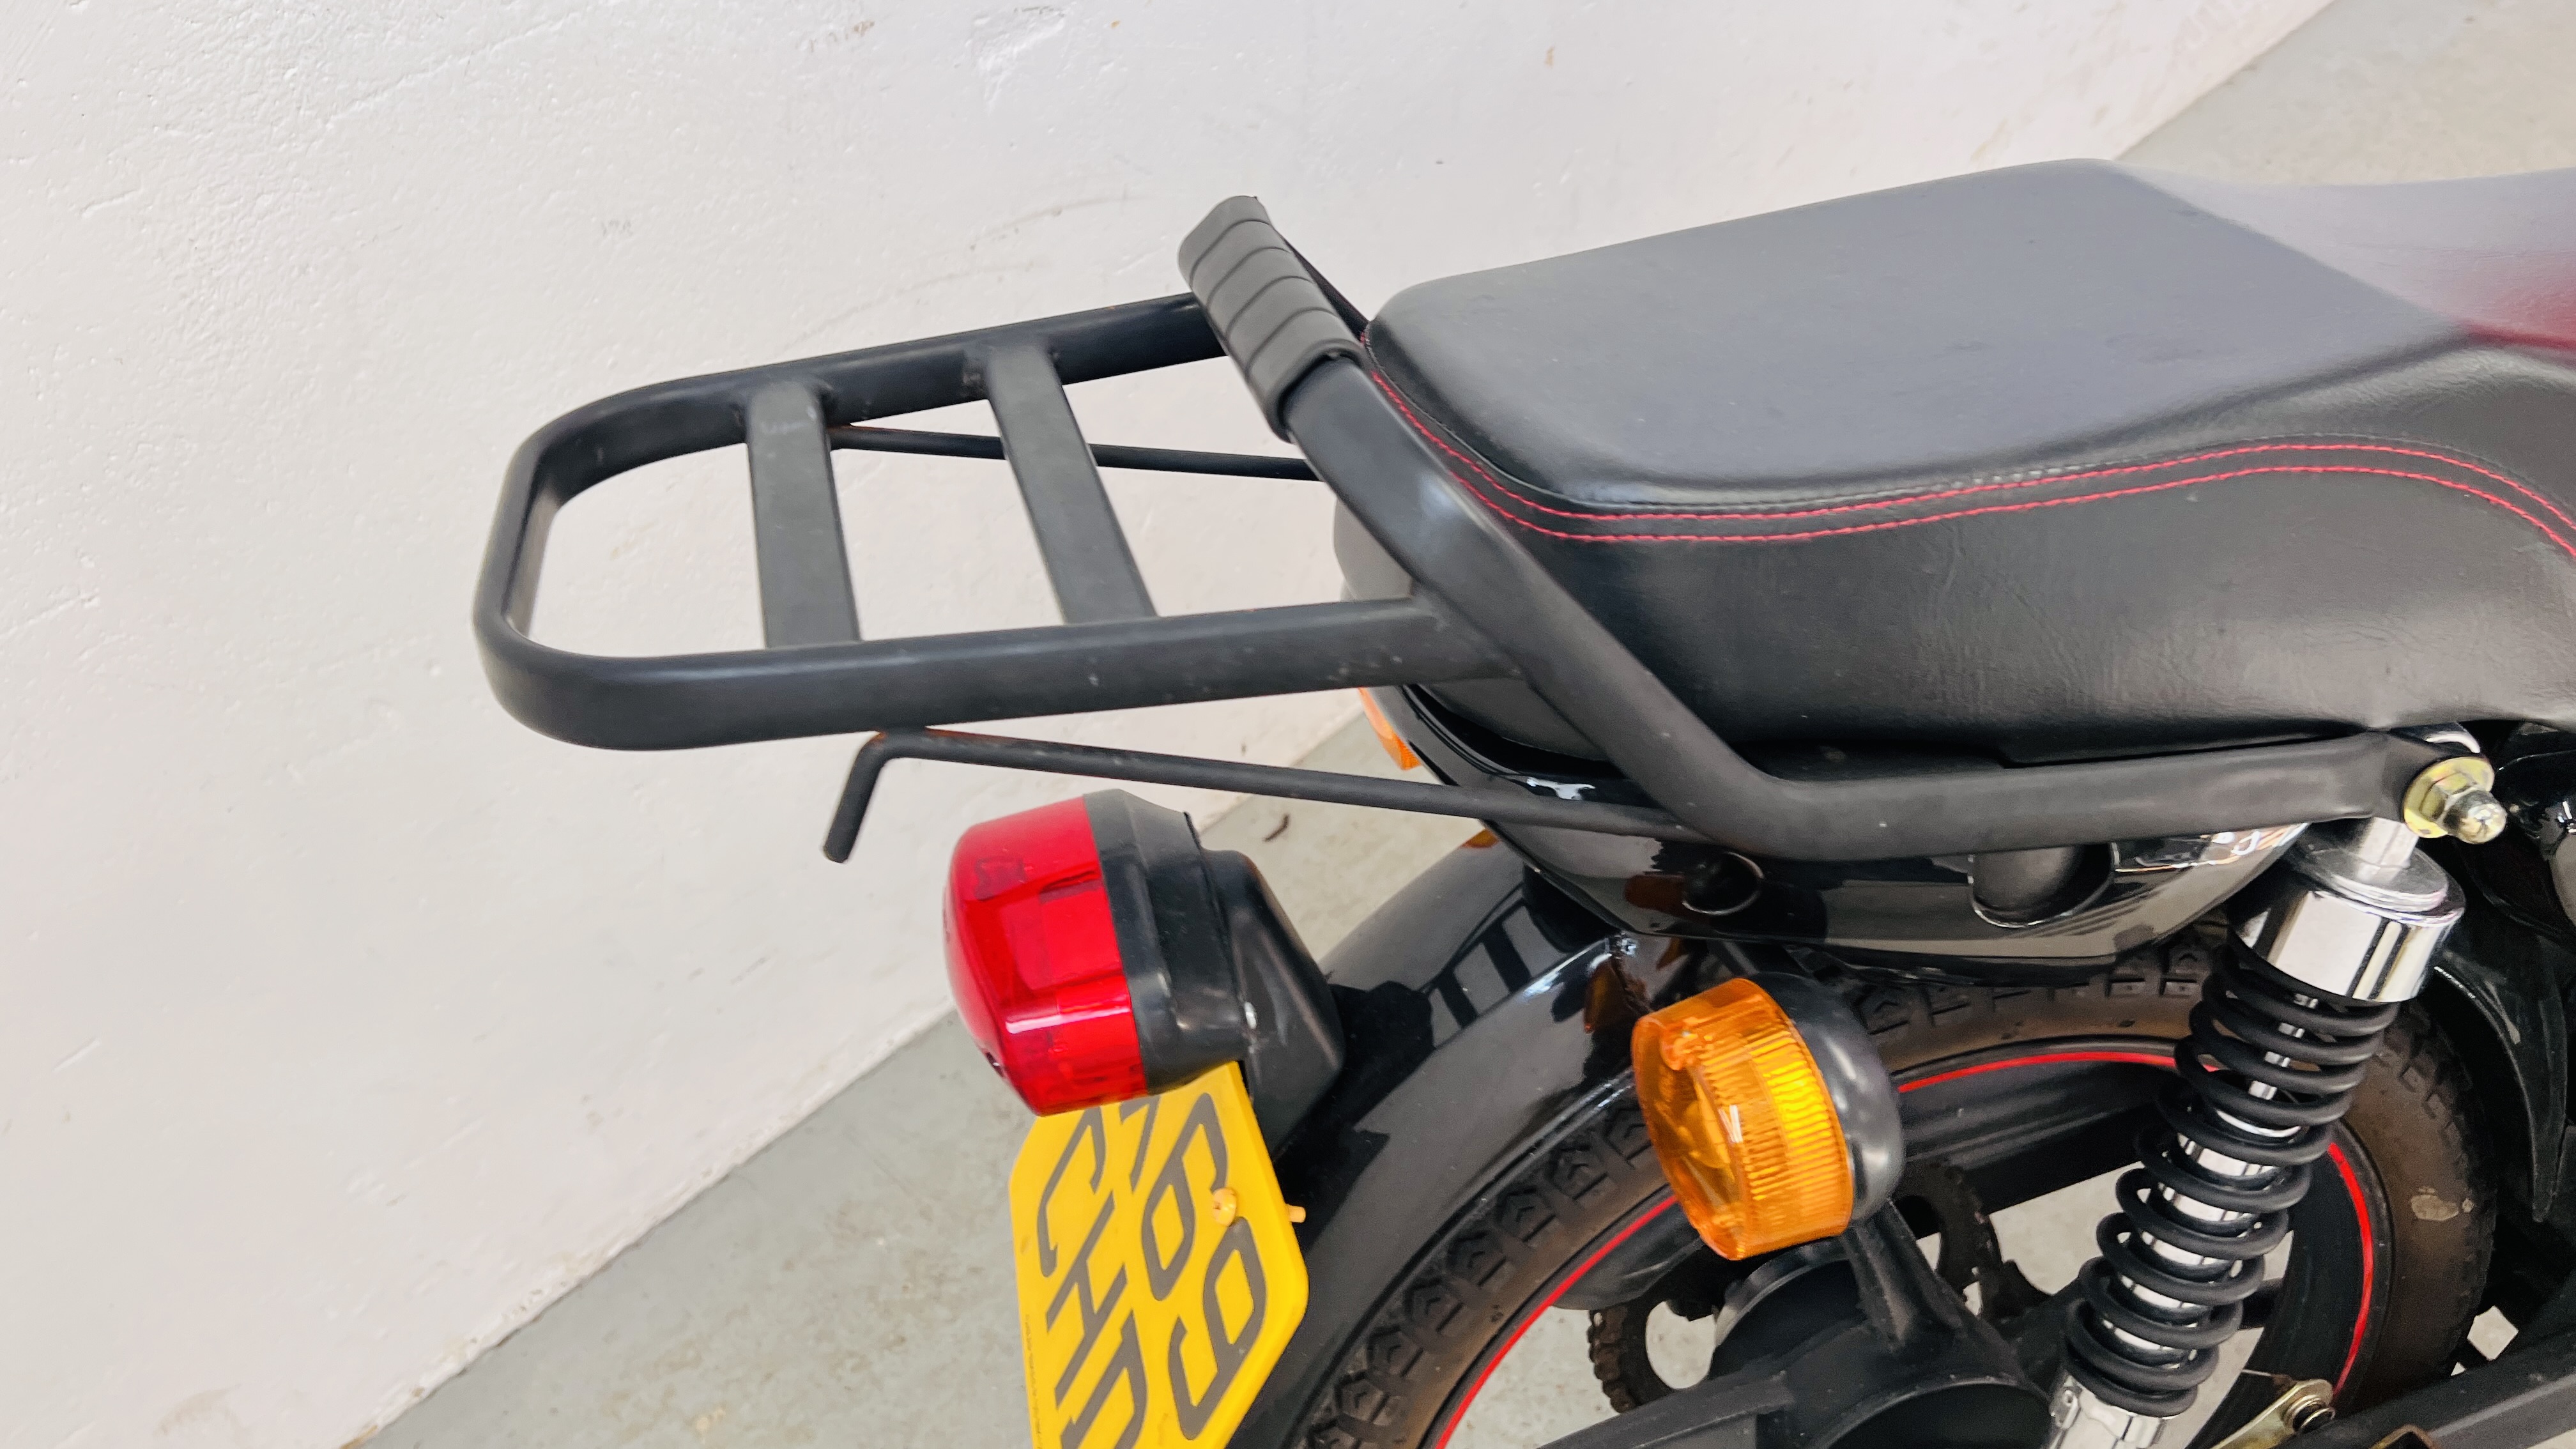 CHAMP 48CC MOTOR CYCLE. VRM - KX69 CHD. FIRST REGISTERED: 01/10/2019. MOT EXPIRED: 30/09/2022. - Image 11 of 22